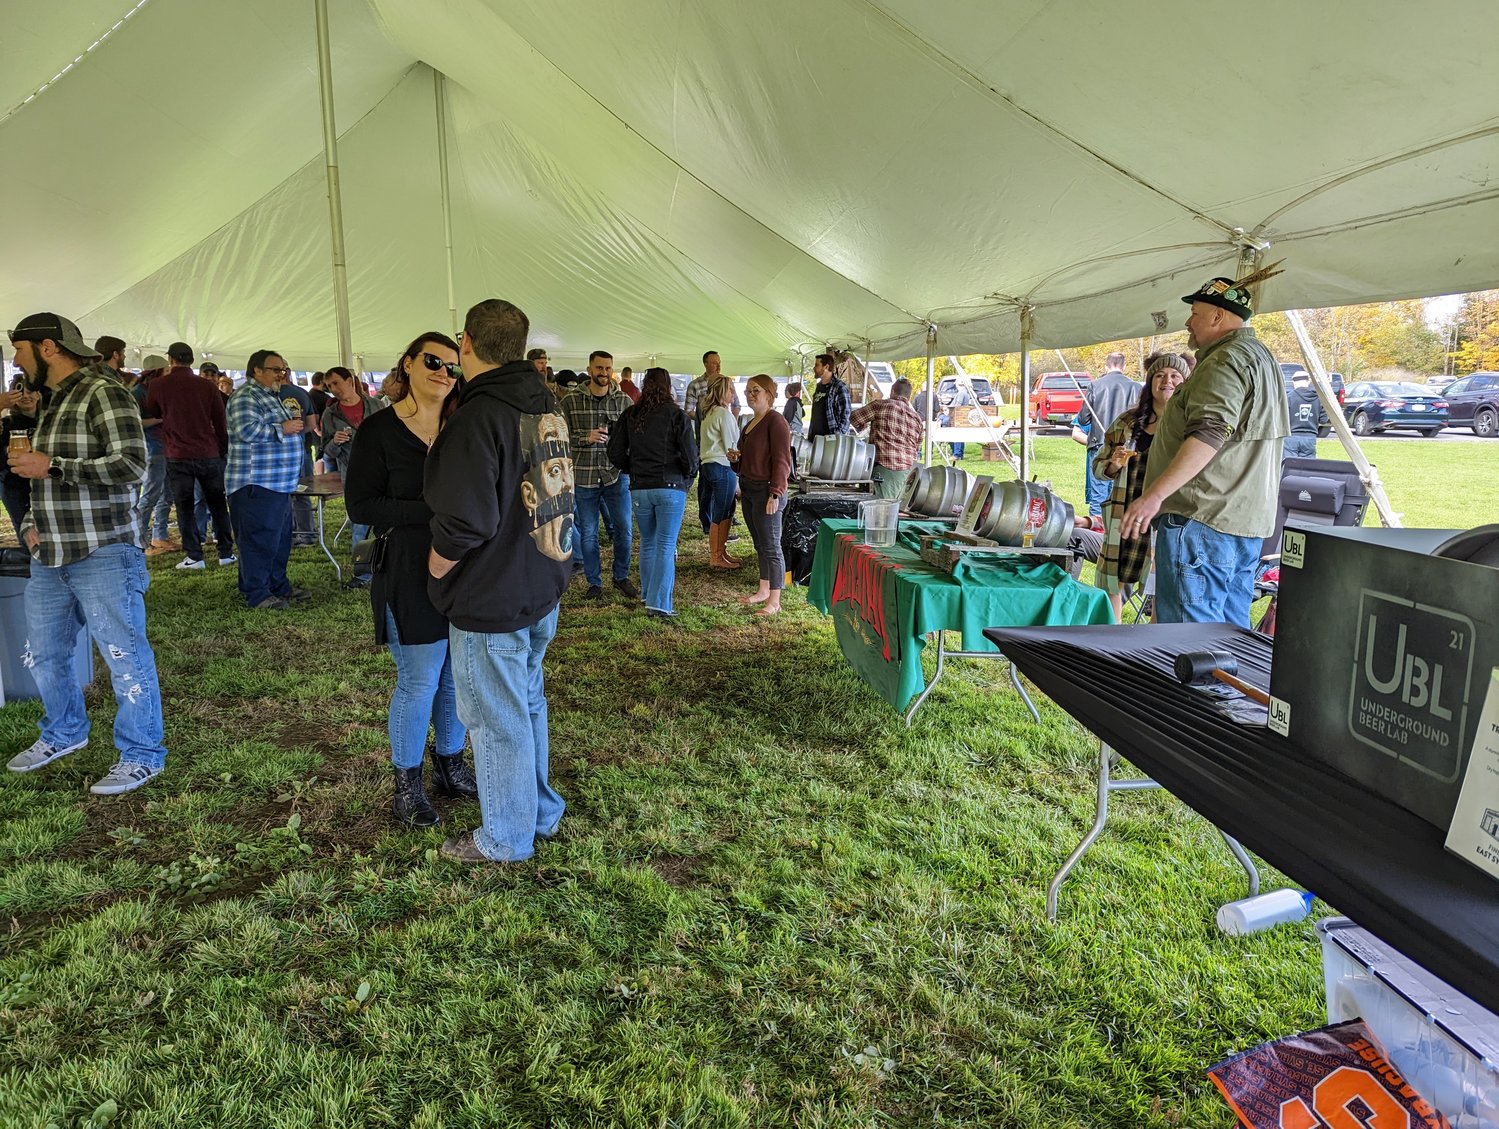 Hundreds of guests from Oneida County and beyond came out to Cask Ale Fest in Marcy on Saturday. More than a dozen local and New York brewers brought their finest cask brewed ale.